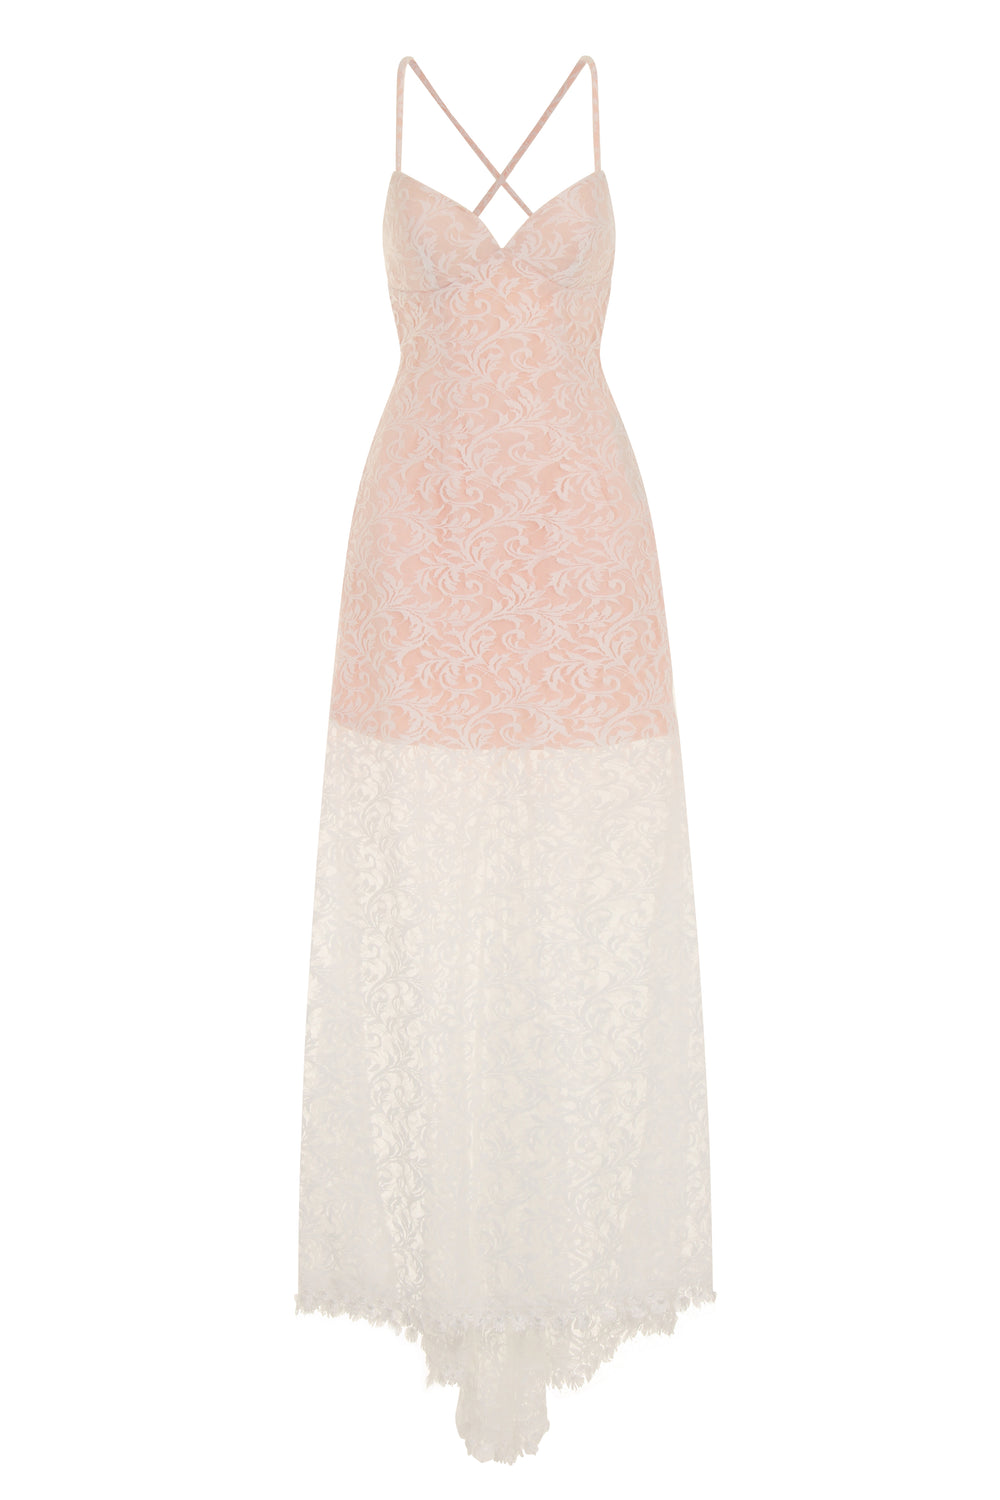 Lilly White Nude Sheer Lace Applique Fishtail Maxi Dress